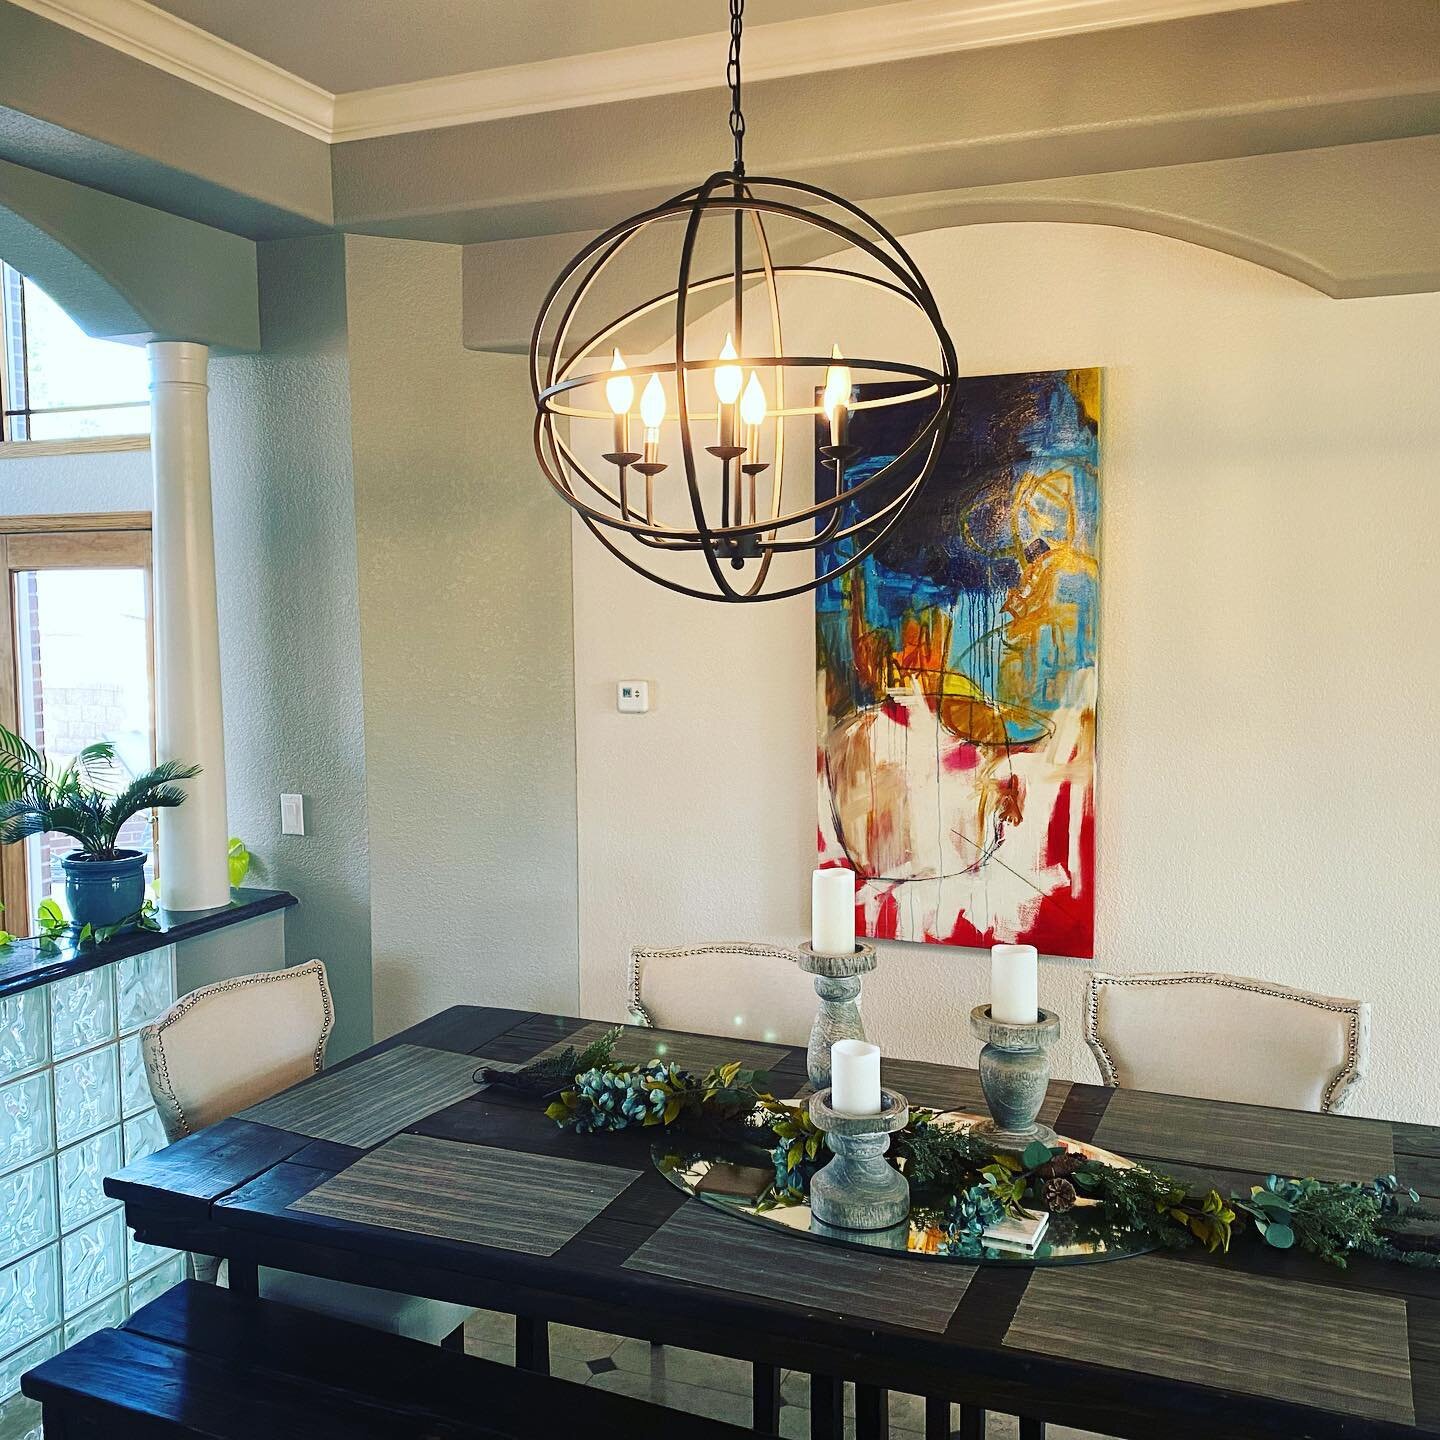 Got the new chandelier and painting up! Art was done by our talented friend Elisa Gomez! #elisagomezart #lifestyle #realestatewealthandlifestyle